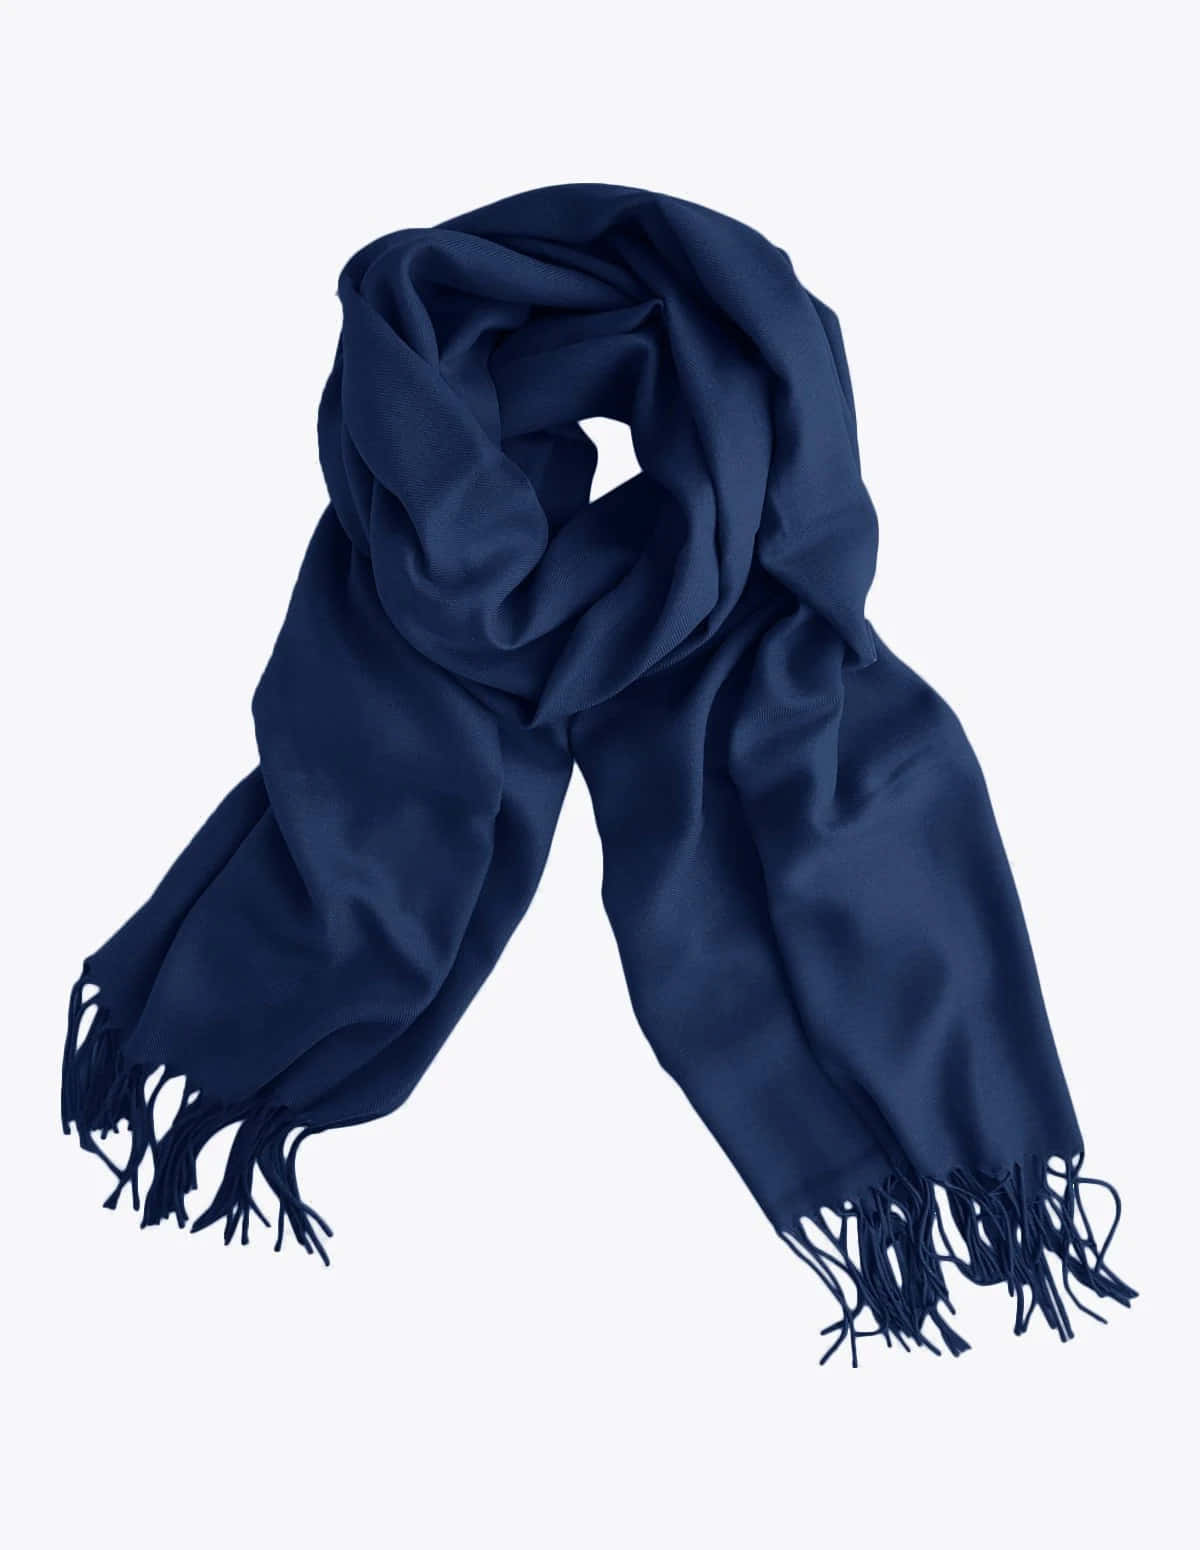 Navy Blue Scarf Against a Classic White Background Wallpaper